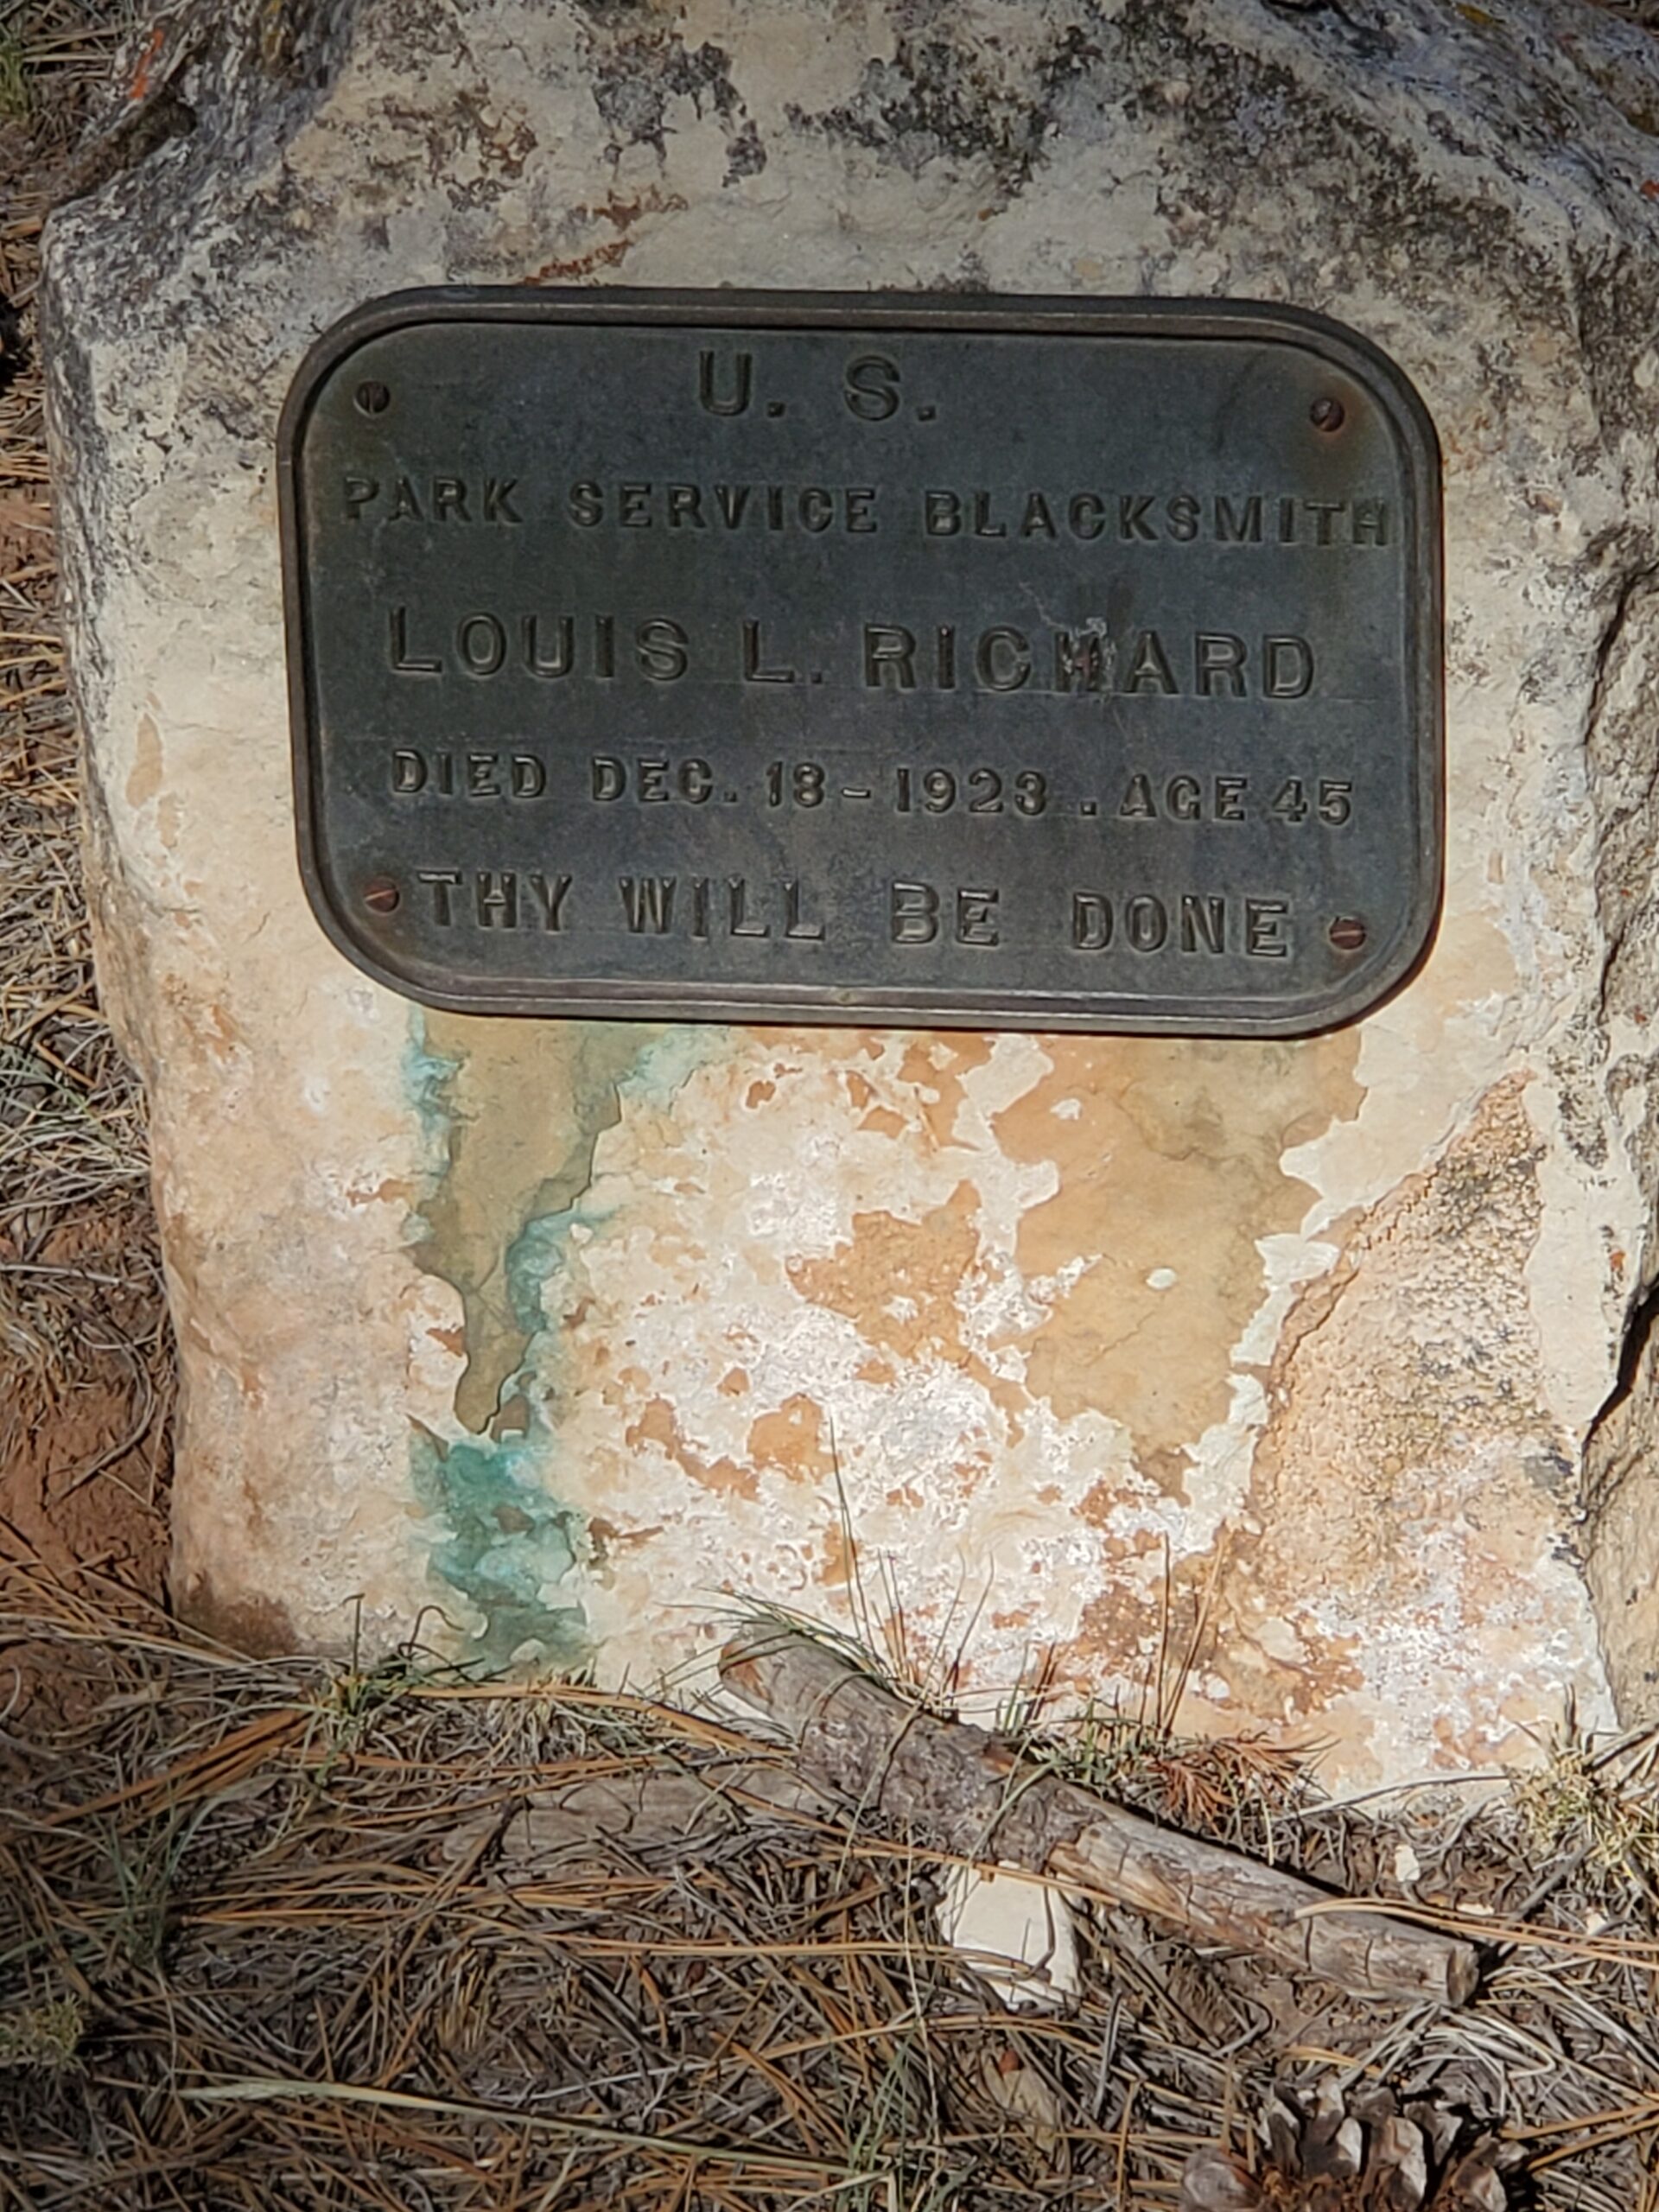 This headstone dates from 1928, one of the older markers in the cemetery